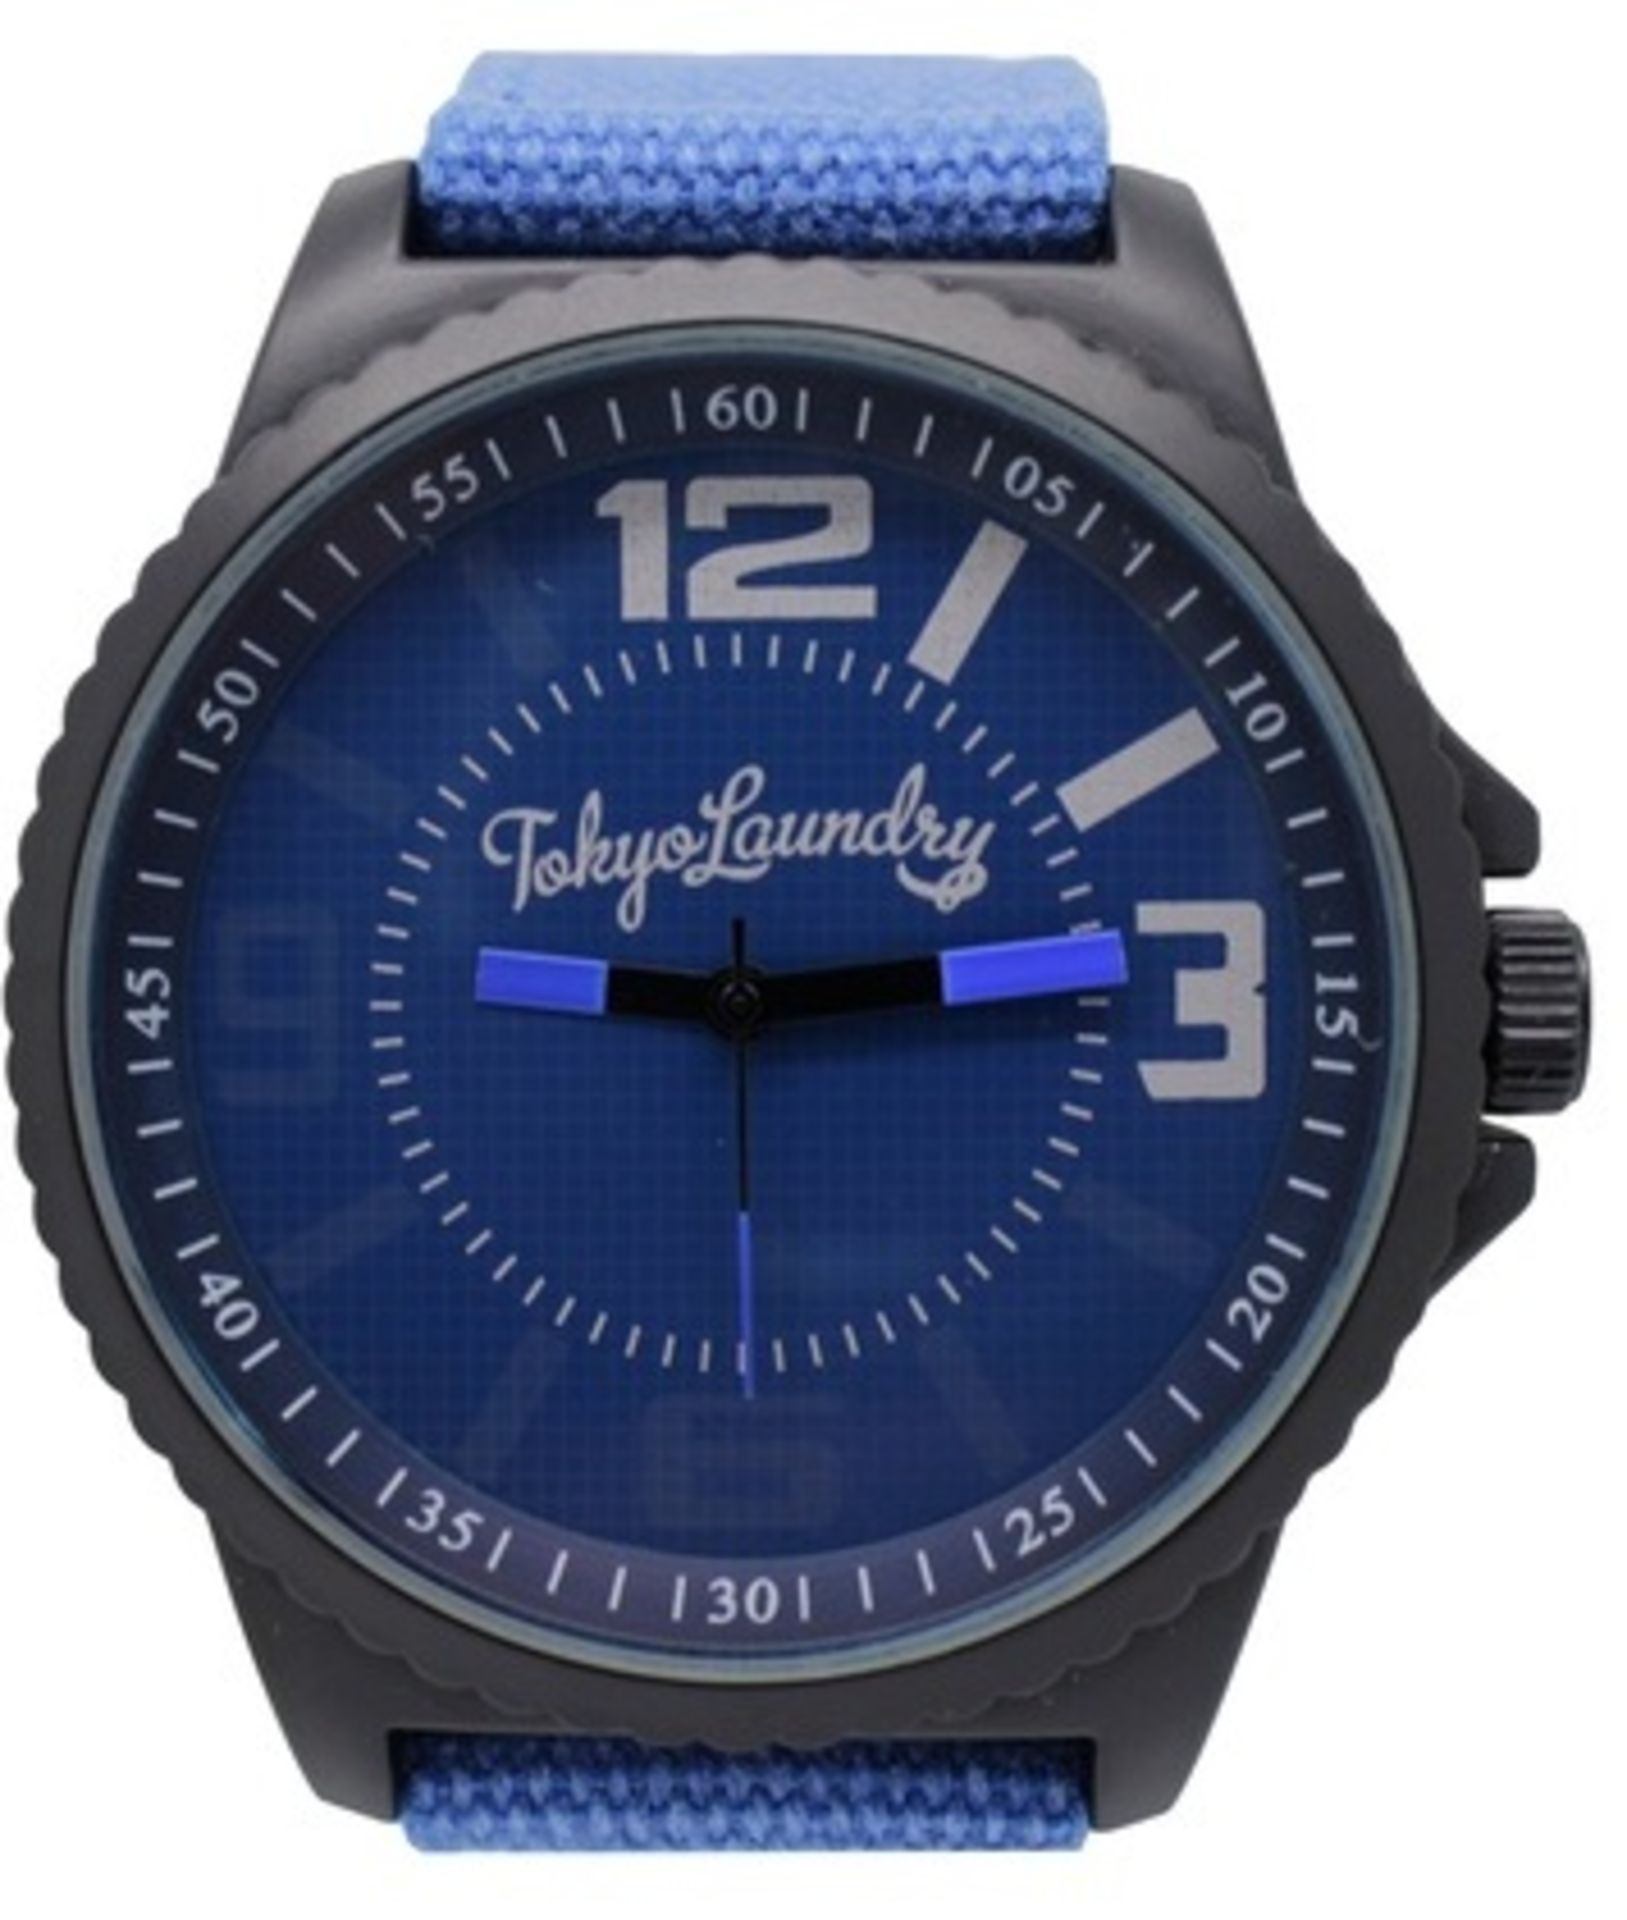 V Brand New Gents Tokyo Laundry Blue Canvas Strap Analogue Watch - RRP £49.99